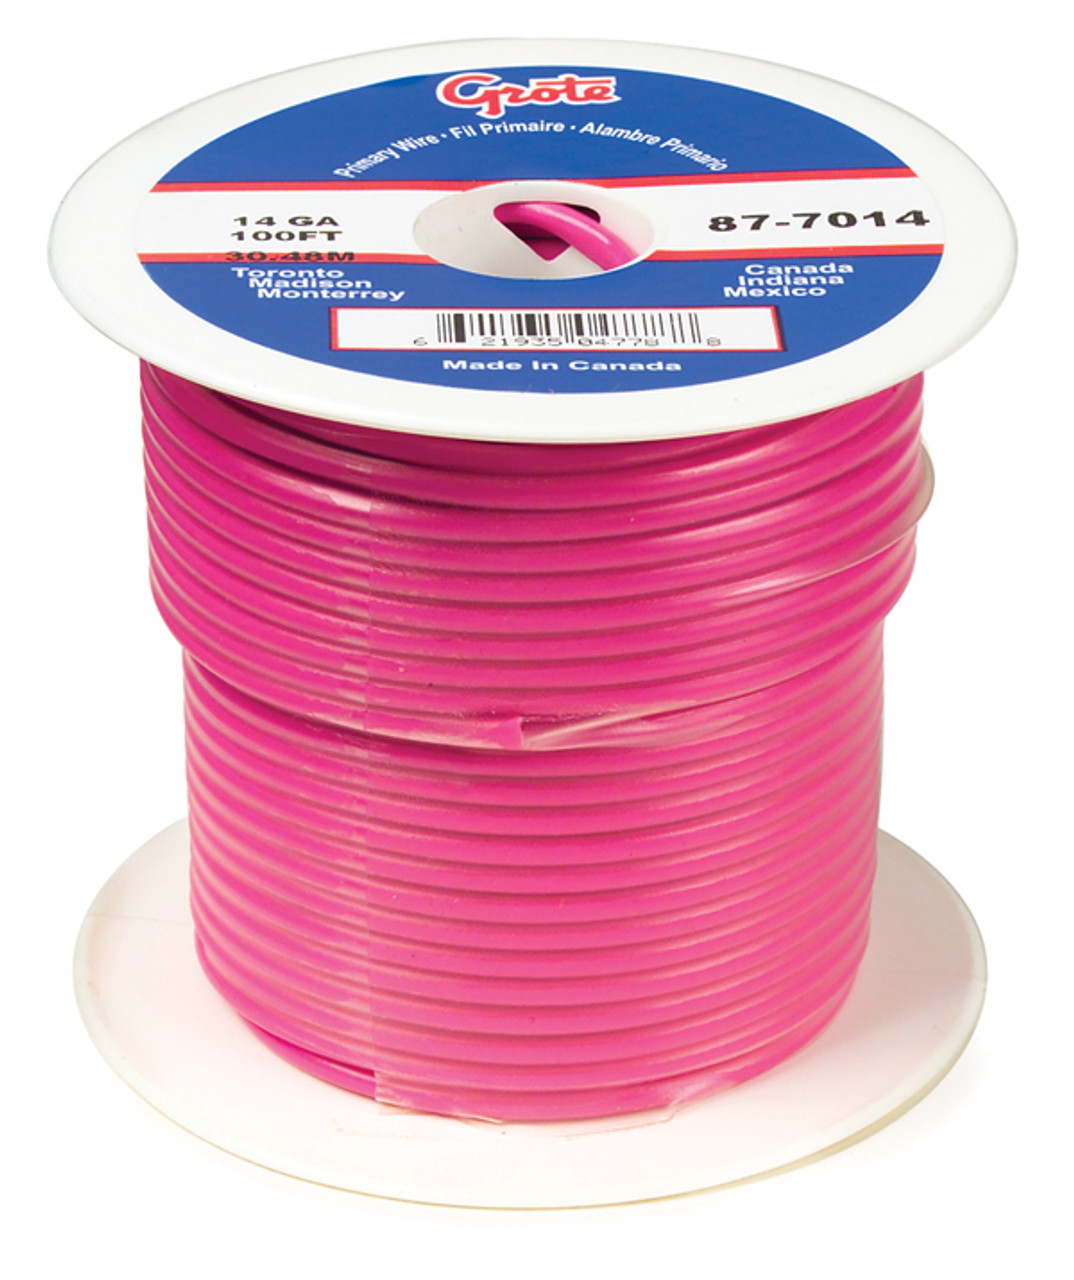 14 AWG General Purpose Thermo Plastic Wire @ 100' - Pink  87-7014